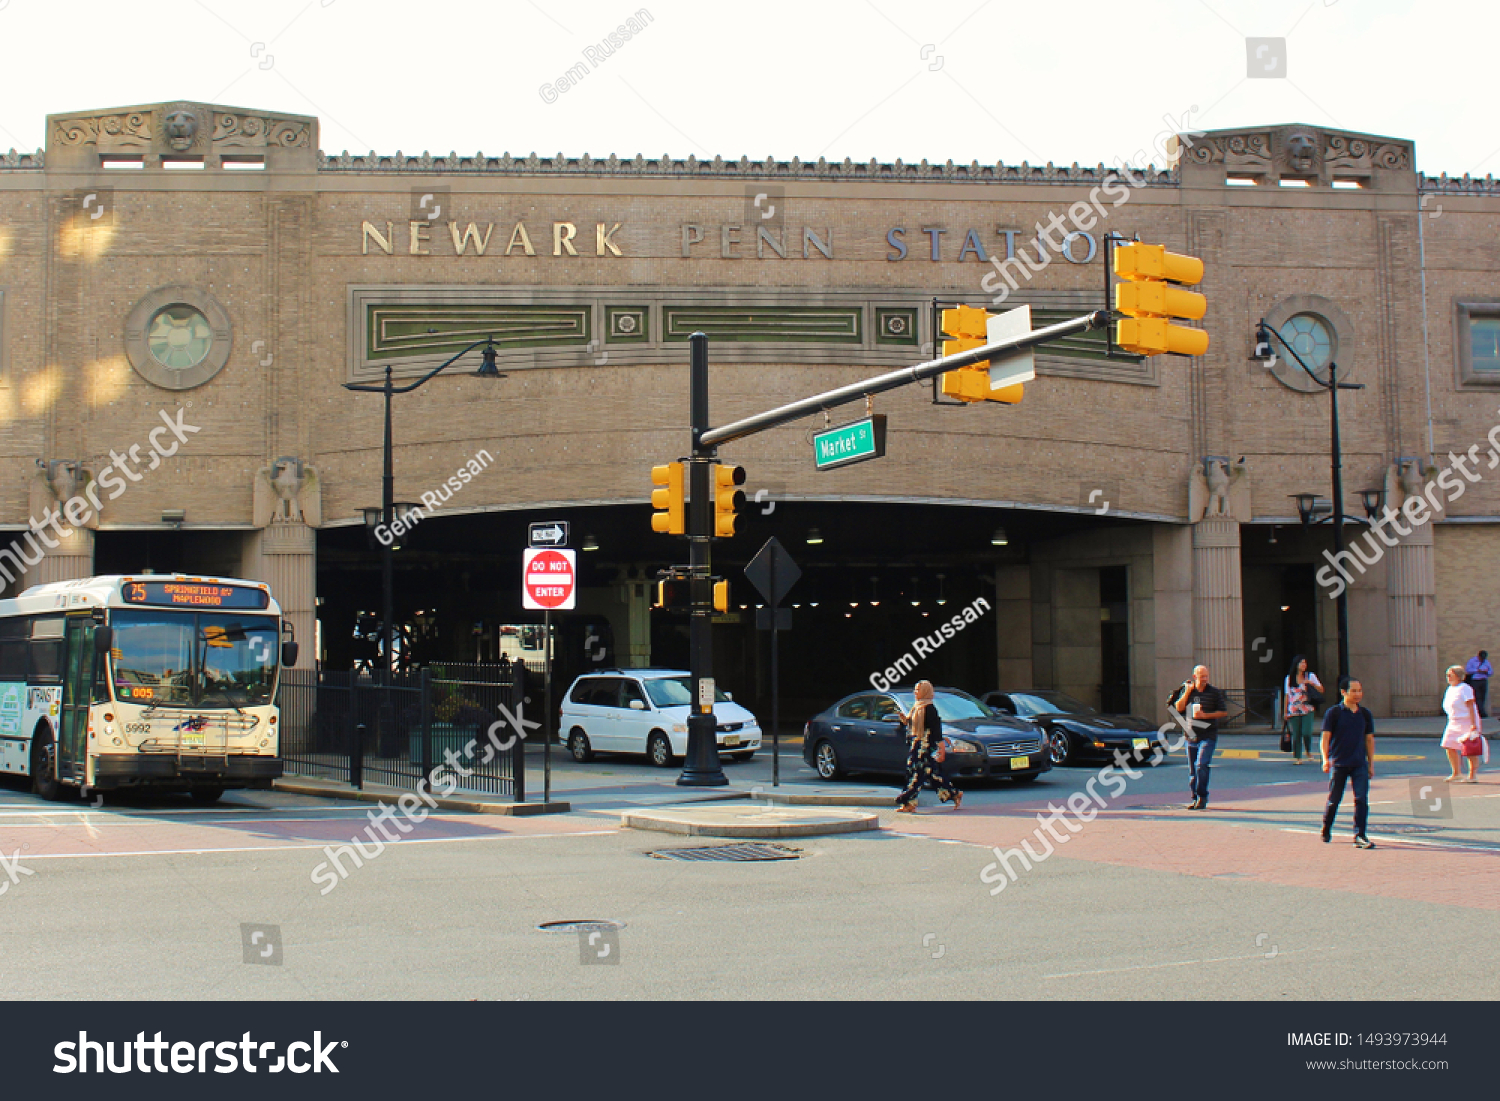 Stock Photo Newark New Jersey August Th View Of The Market Street Side Of The Busy Newark Penn 1493973944 